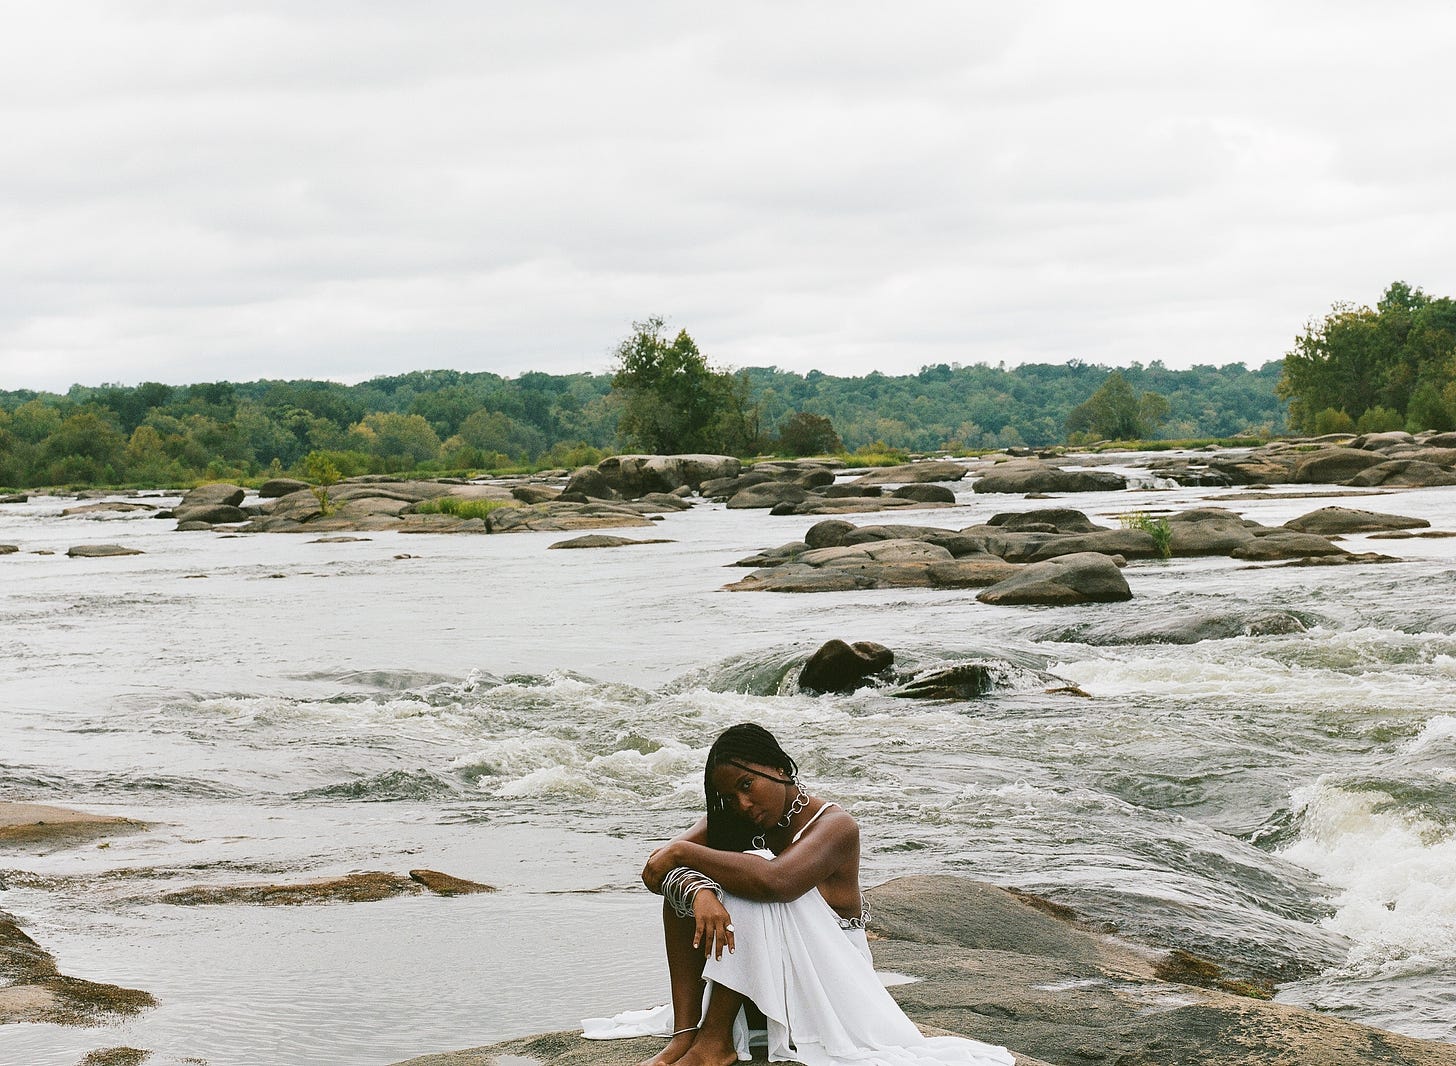 Sitting on river rocks in a white dress made with my needle and need as eager water gushes behind me. The distant horizon is lined with green trees and the sky is made of cotton.